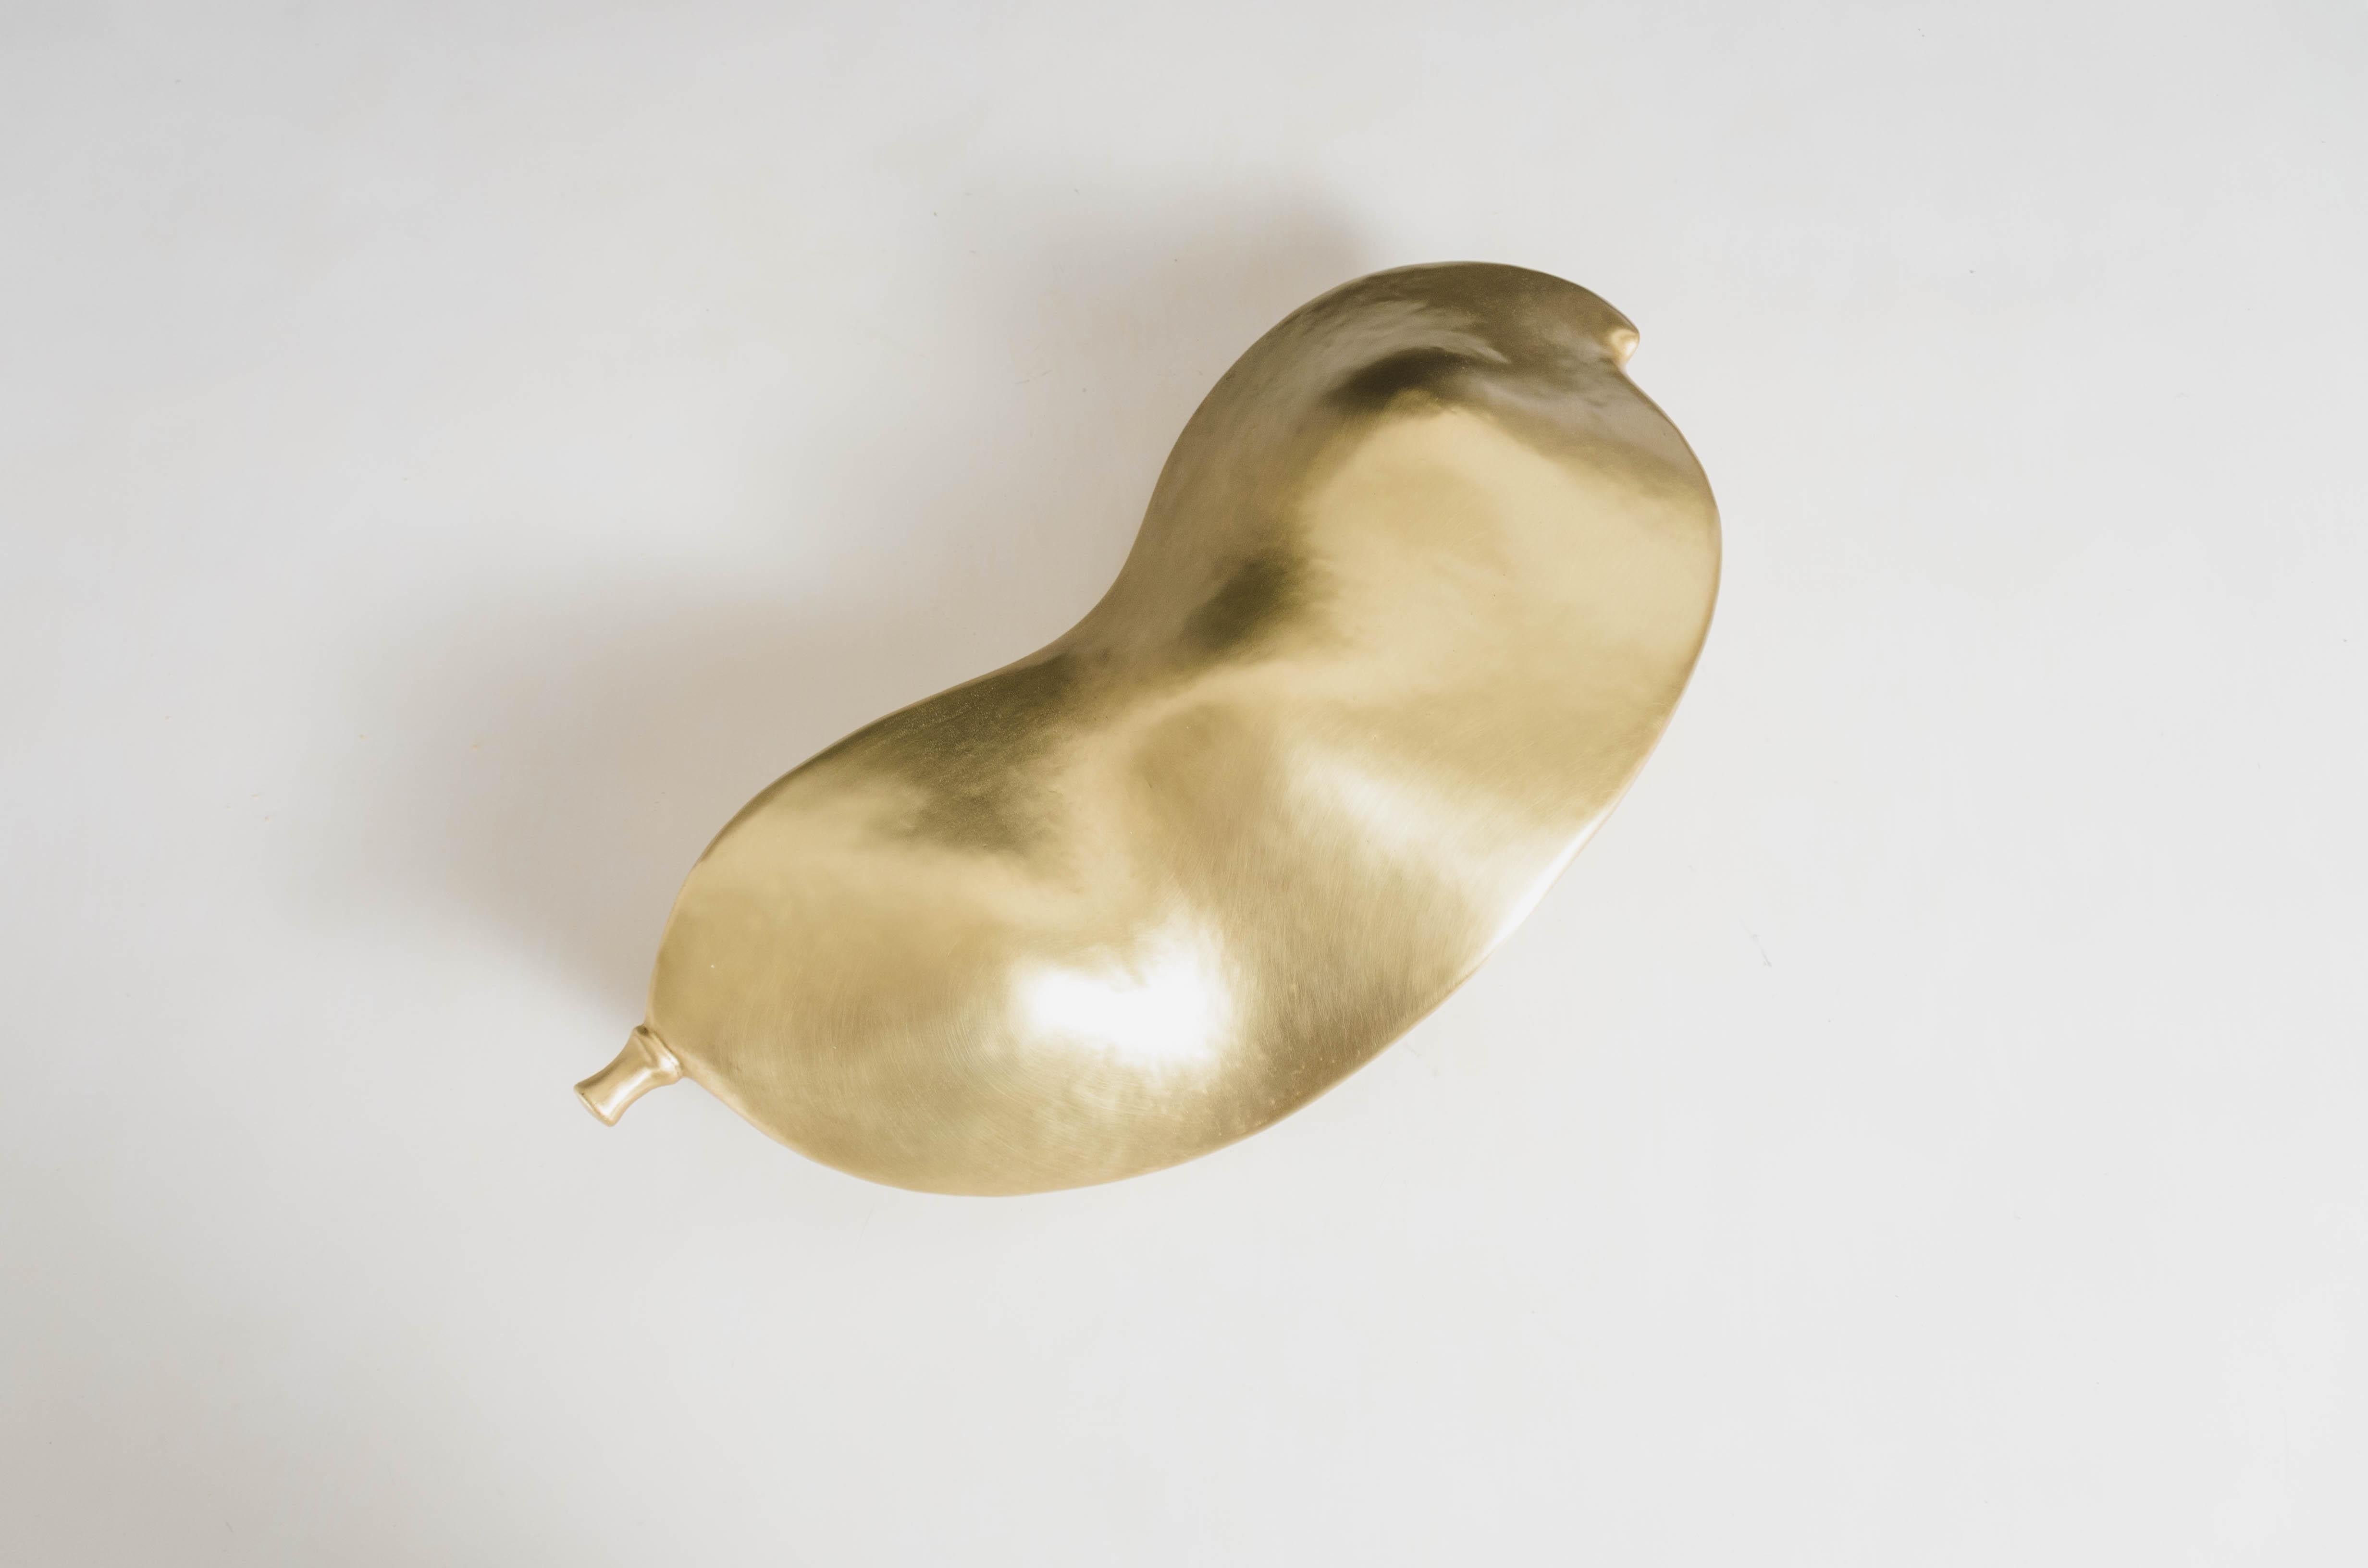 Modern Contemporary Lima Bean Sculpture in Brass by Robert Kuo, Hand Repoussé, Limited For Sale